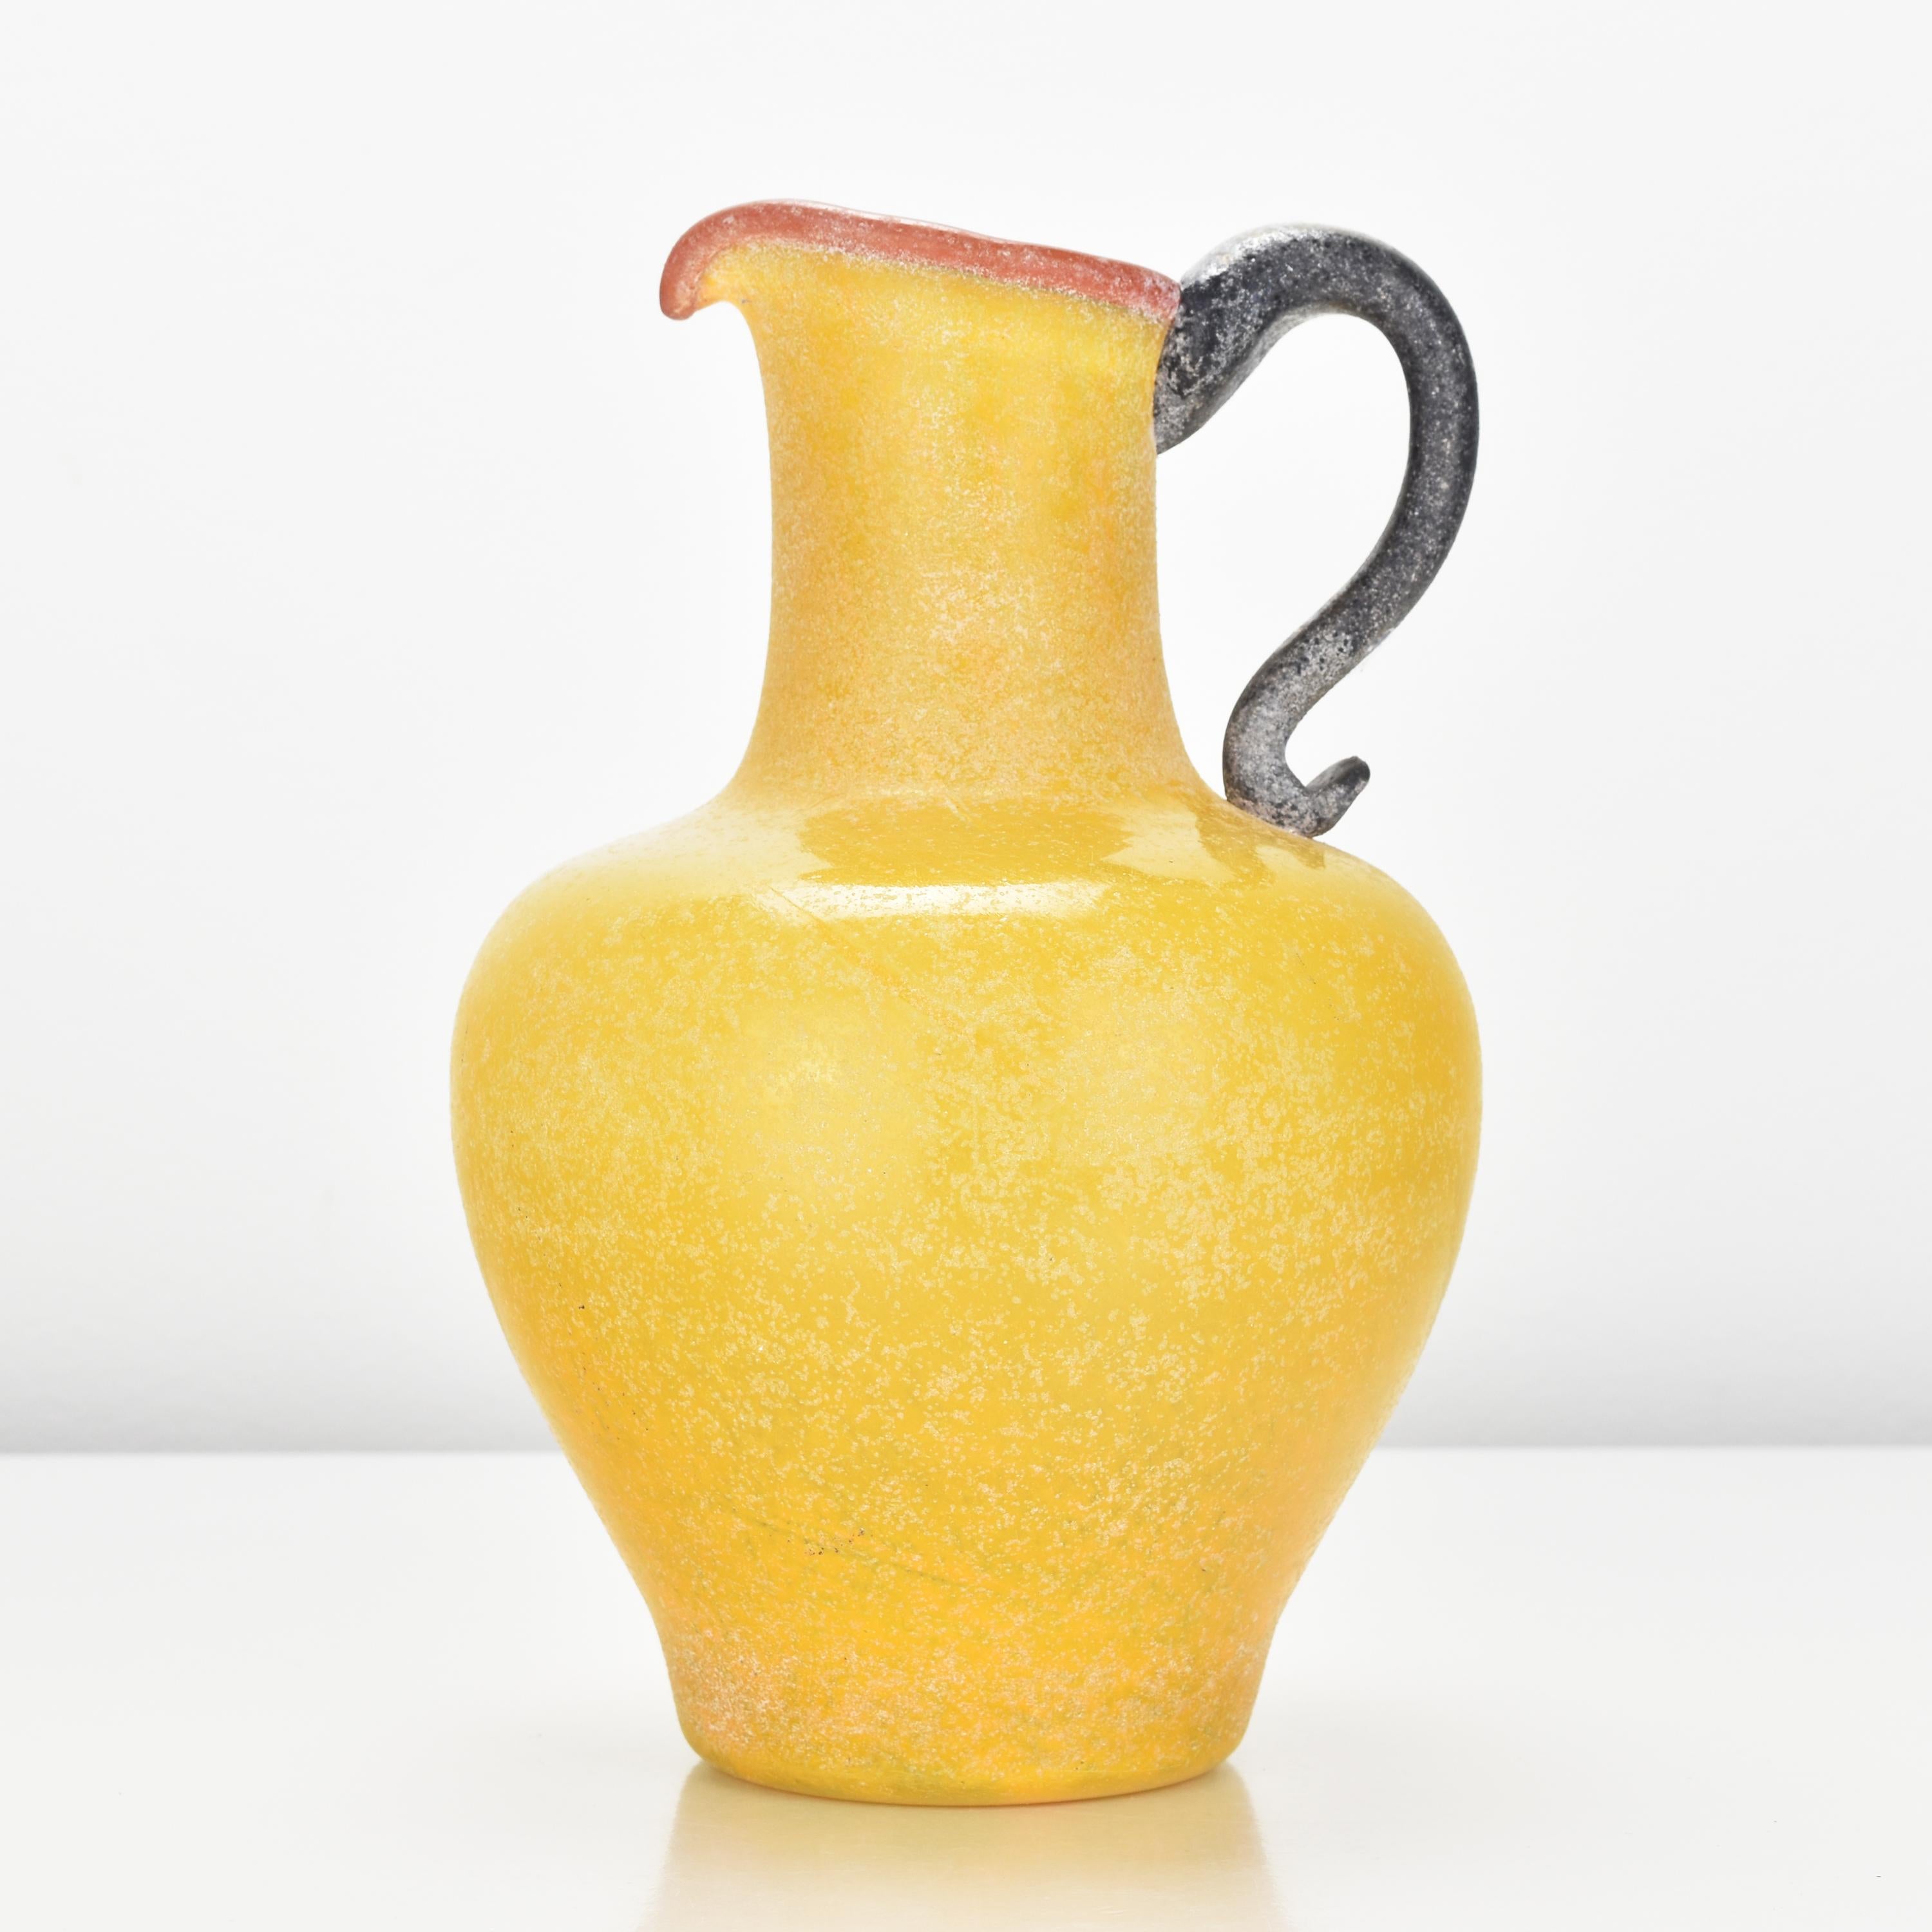 Vibrant yellow art glass jug vase with red upper rim and black handle probably made by Archimede Seguso.

Archimede Seguso (1909 - 1999) was a prominent and highly influential Italian glass artist and master glassblower from the island of Murano,